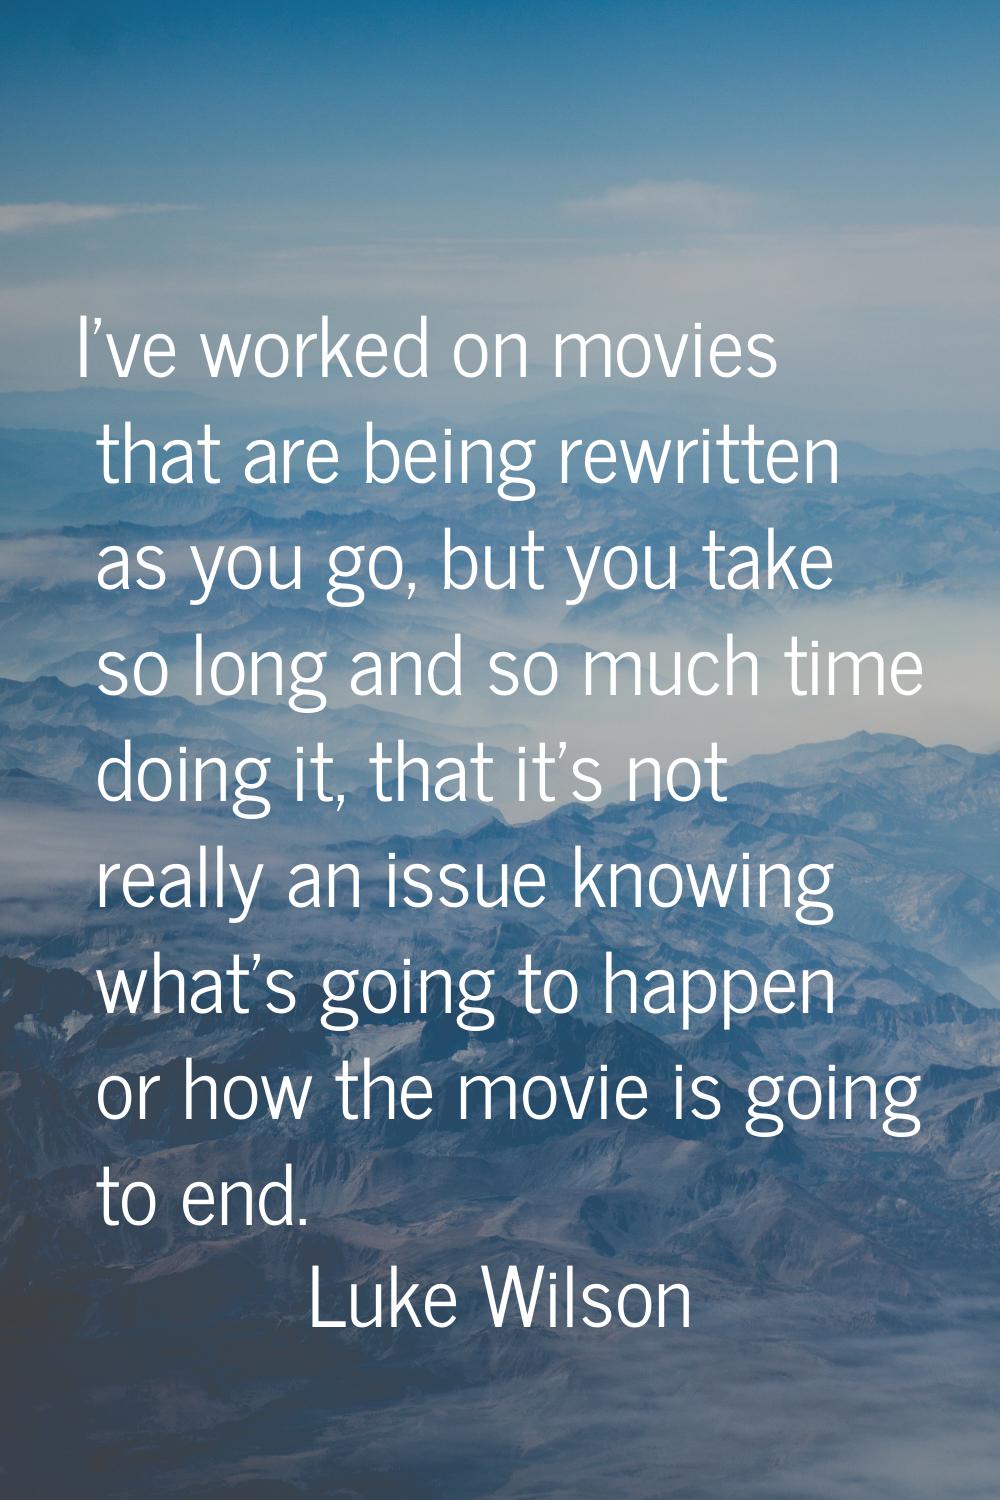 I've worked on movies that are being rewritten as you go, but you take so long and so much time doi